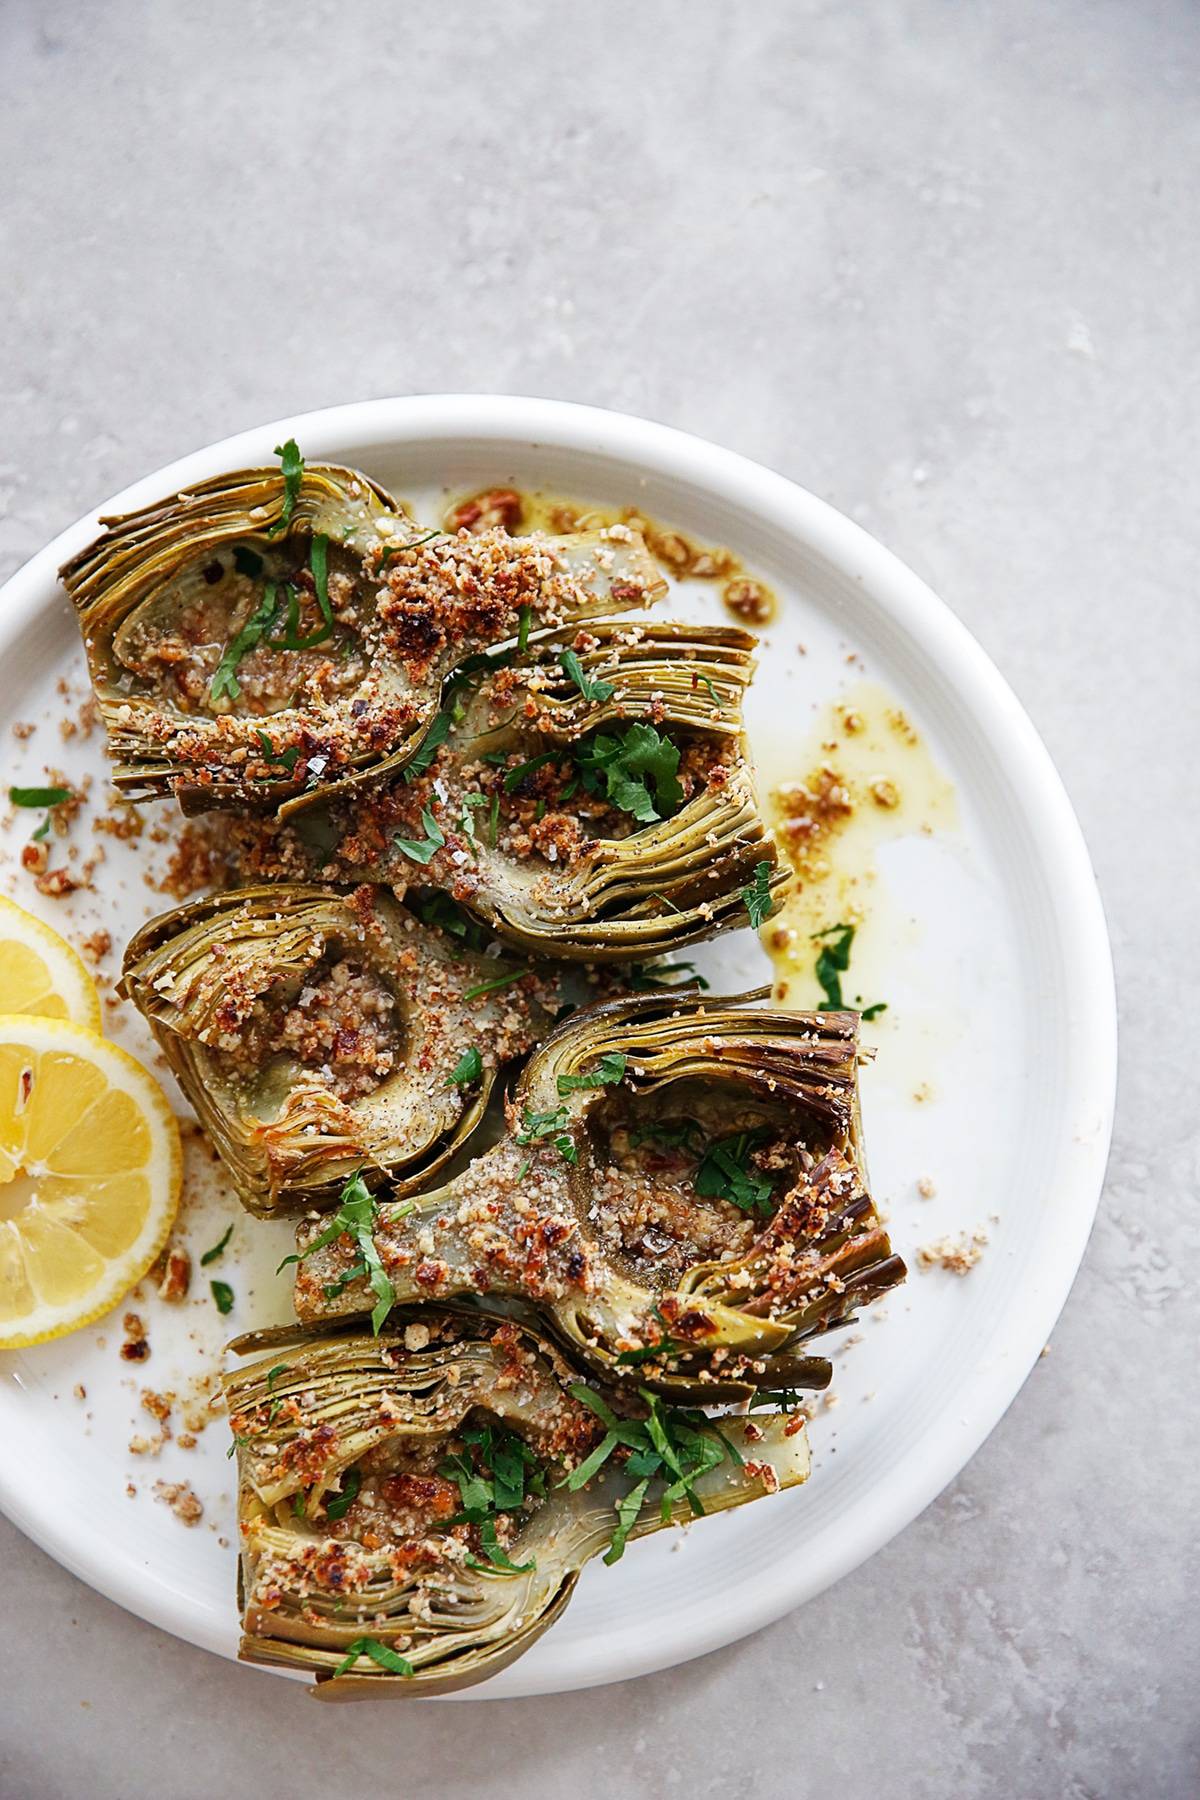 Braised Artichokes with pecan breadcrumbs on a plate